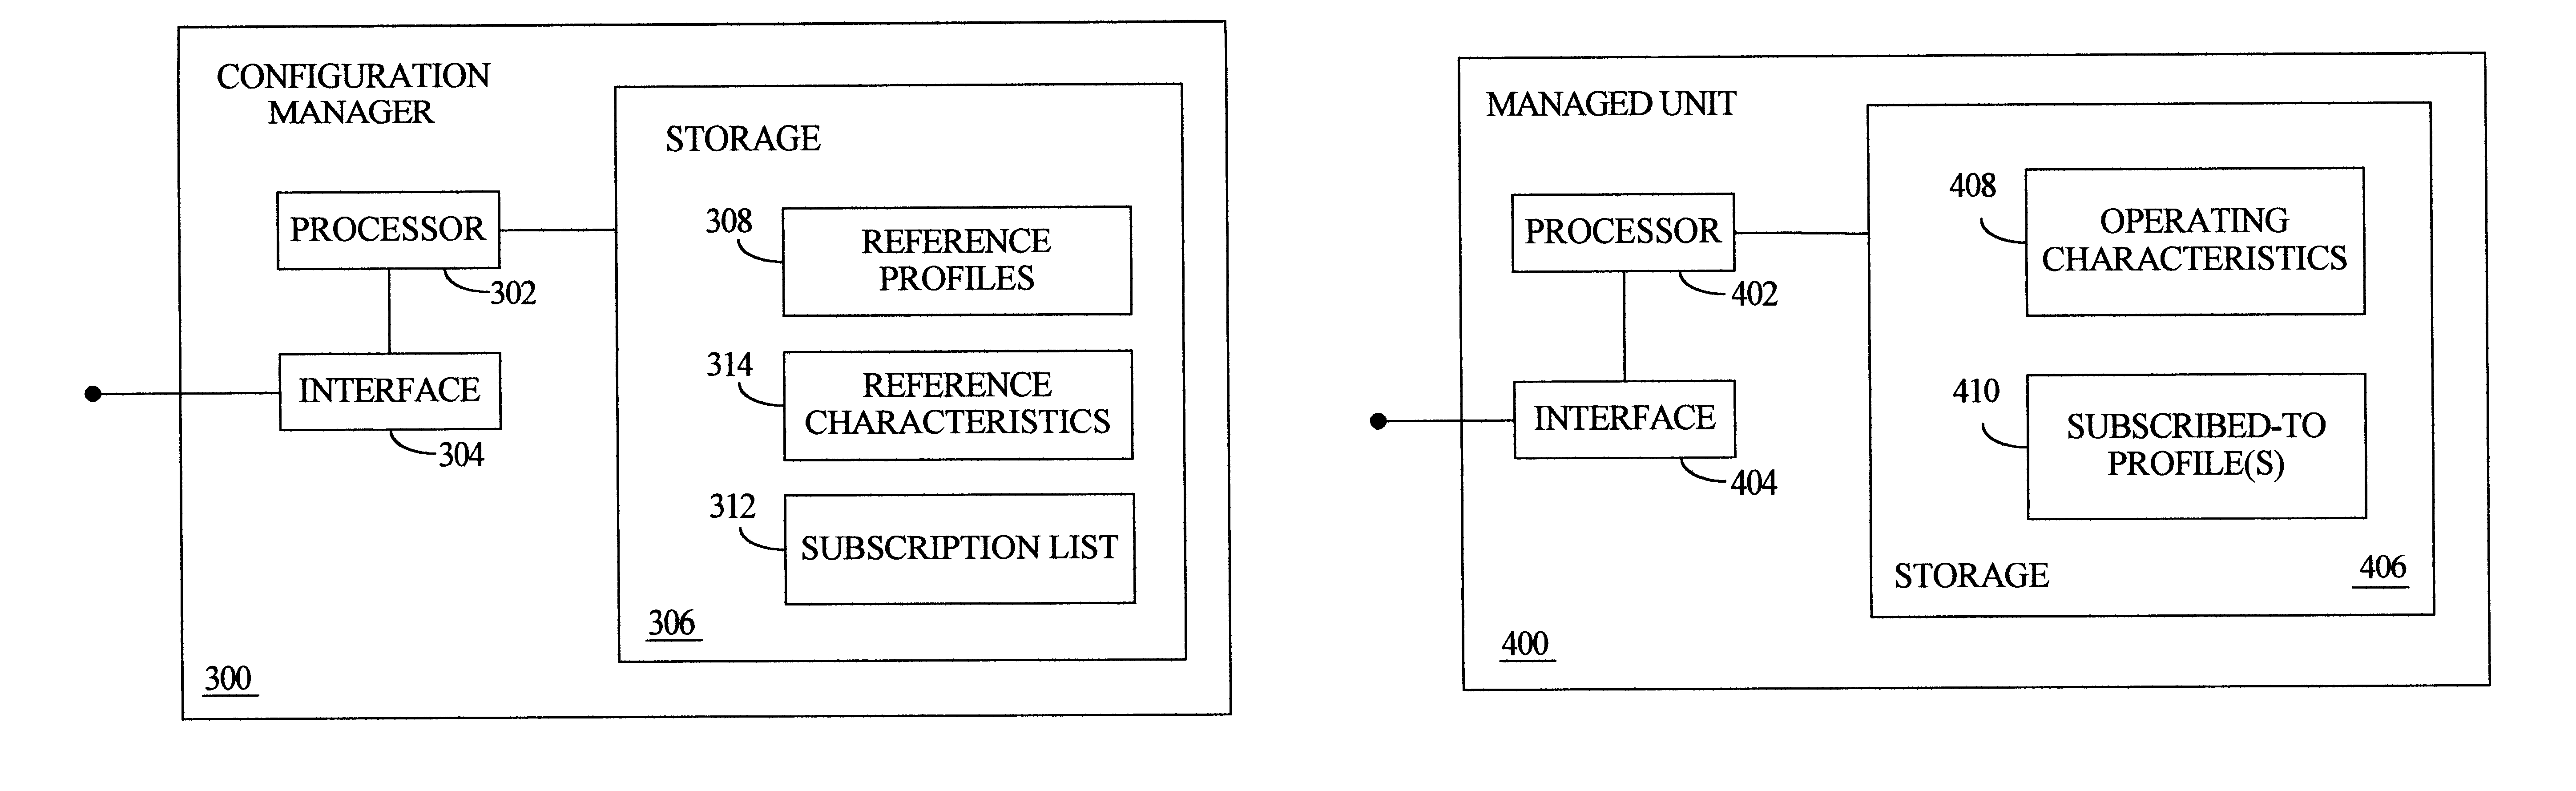 Multiprocessing system with automated propagation of changes to centrally maintained configuration settings